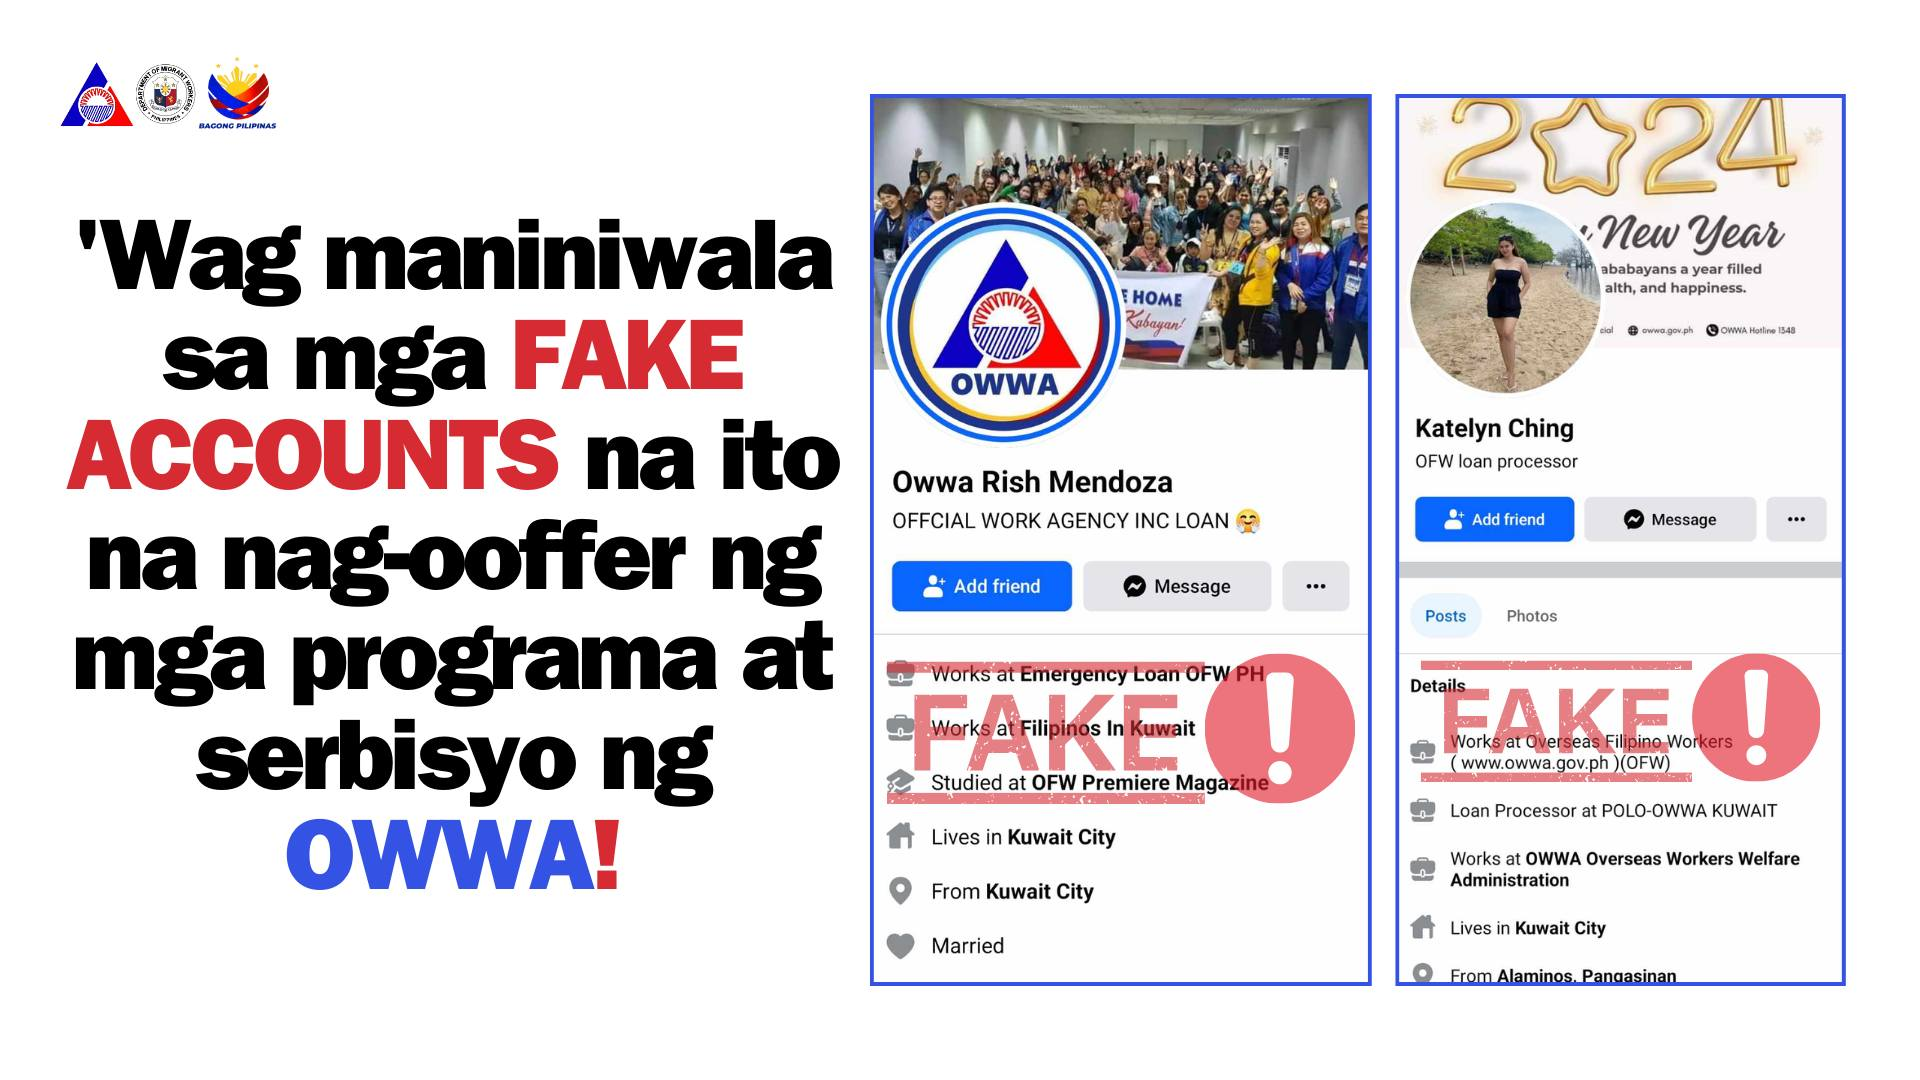 The Overseas Workers Welfare Administration (OWWA) cautions the public regarding Facebook accounts that offer fake programs and services.